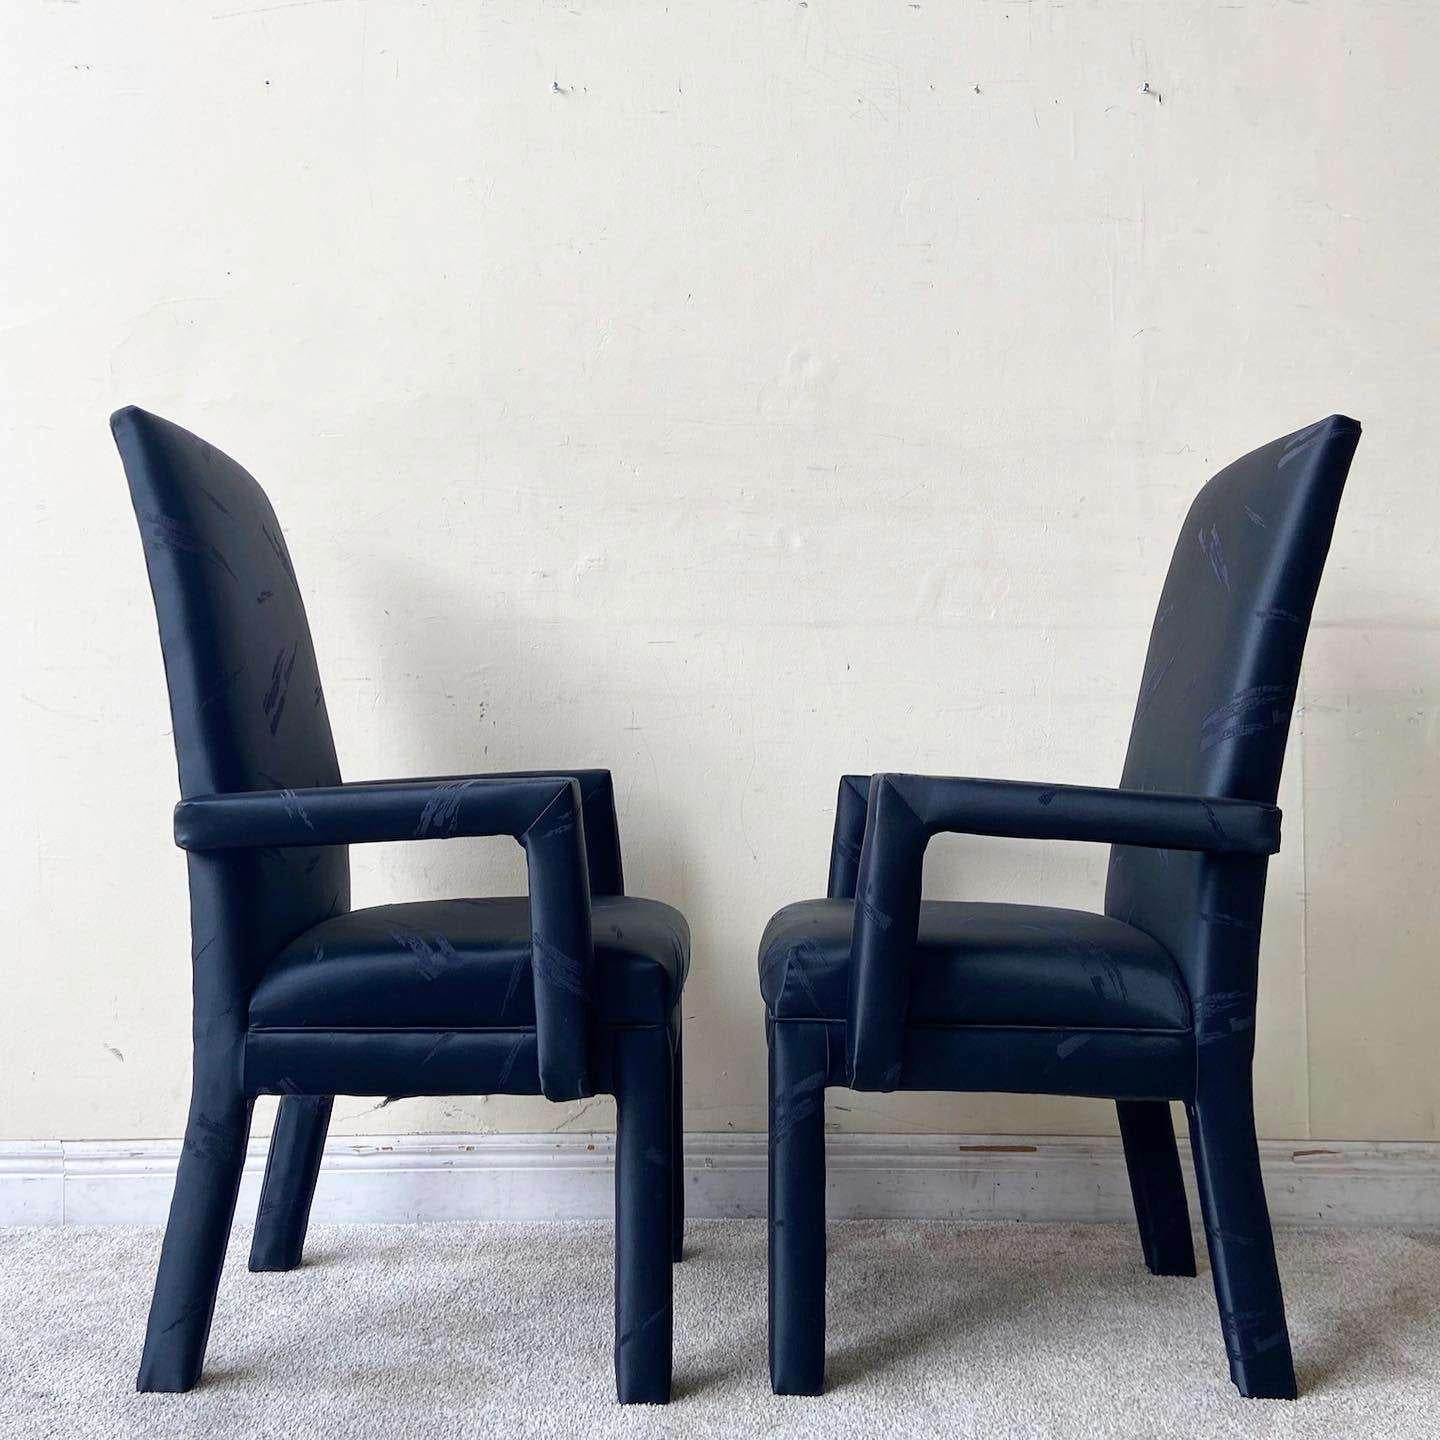 Late 20th Century Postmodern Black on Black Upholstered Parsons Dining Chairs - Set of 6 For Sale